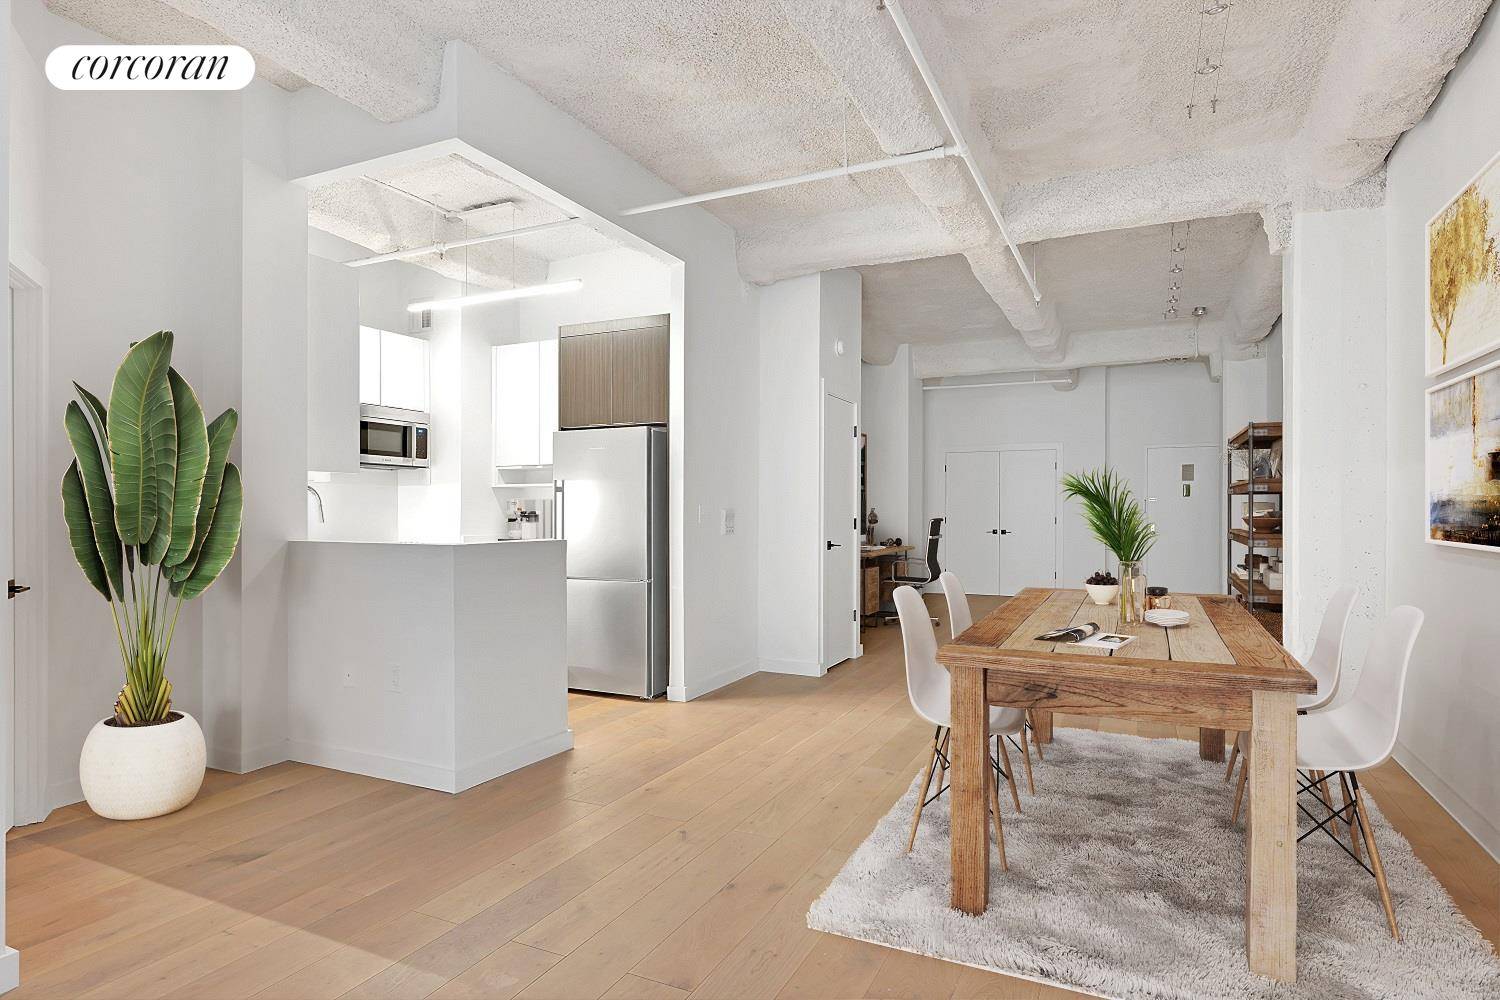 Fully renovated Sprawling and unique 1050sf 1 bedroom loft.